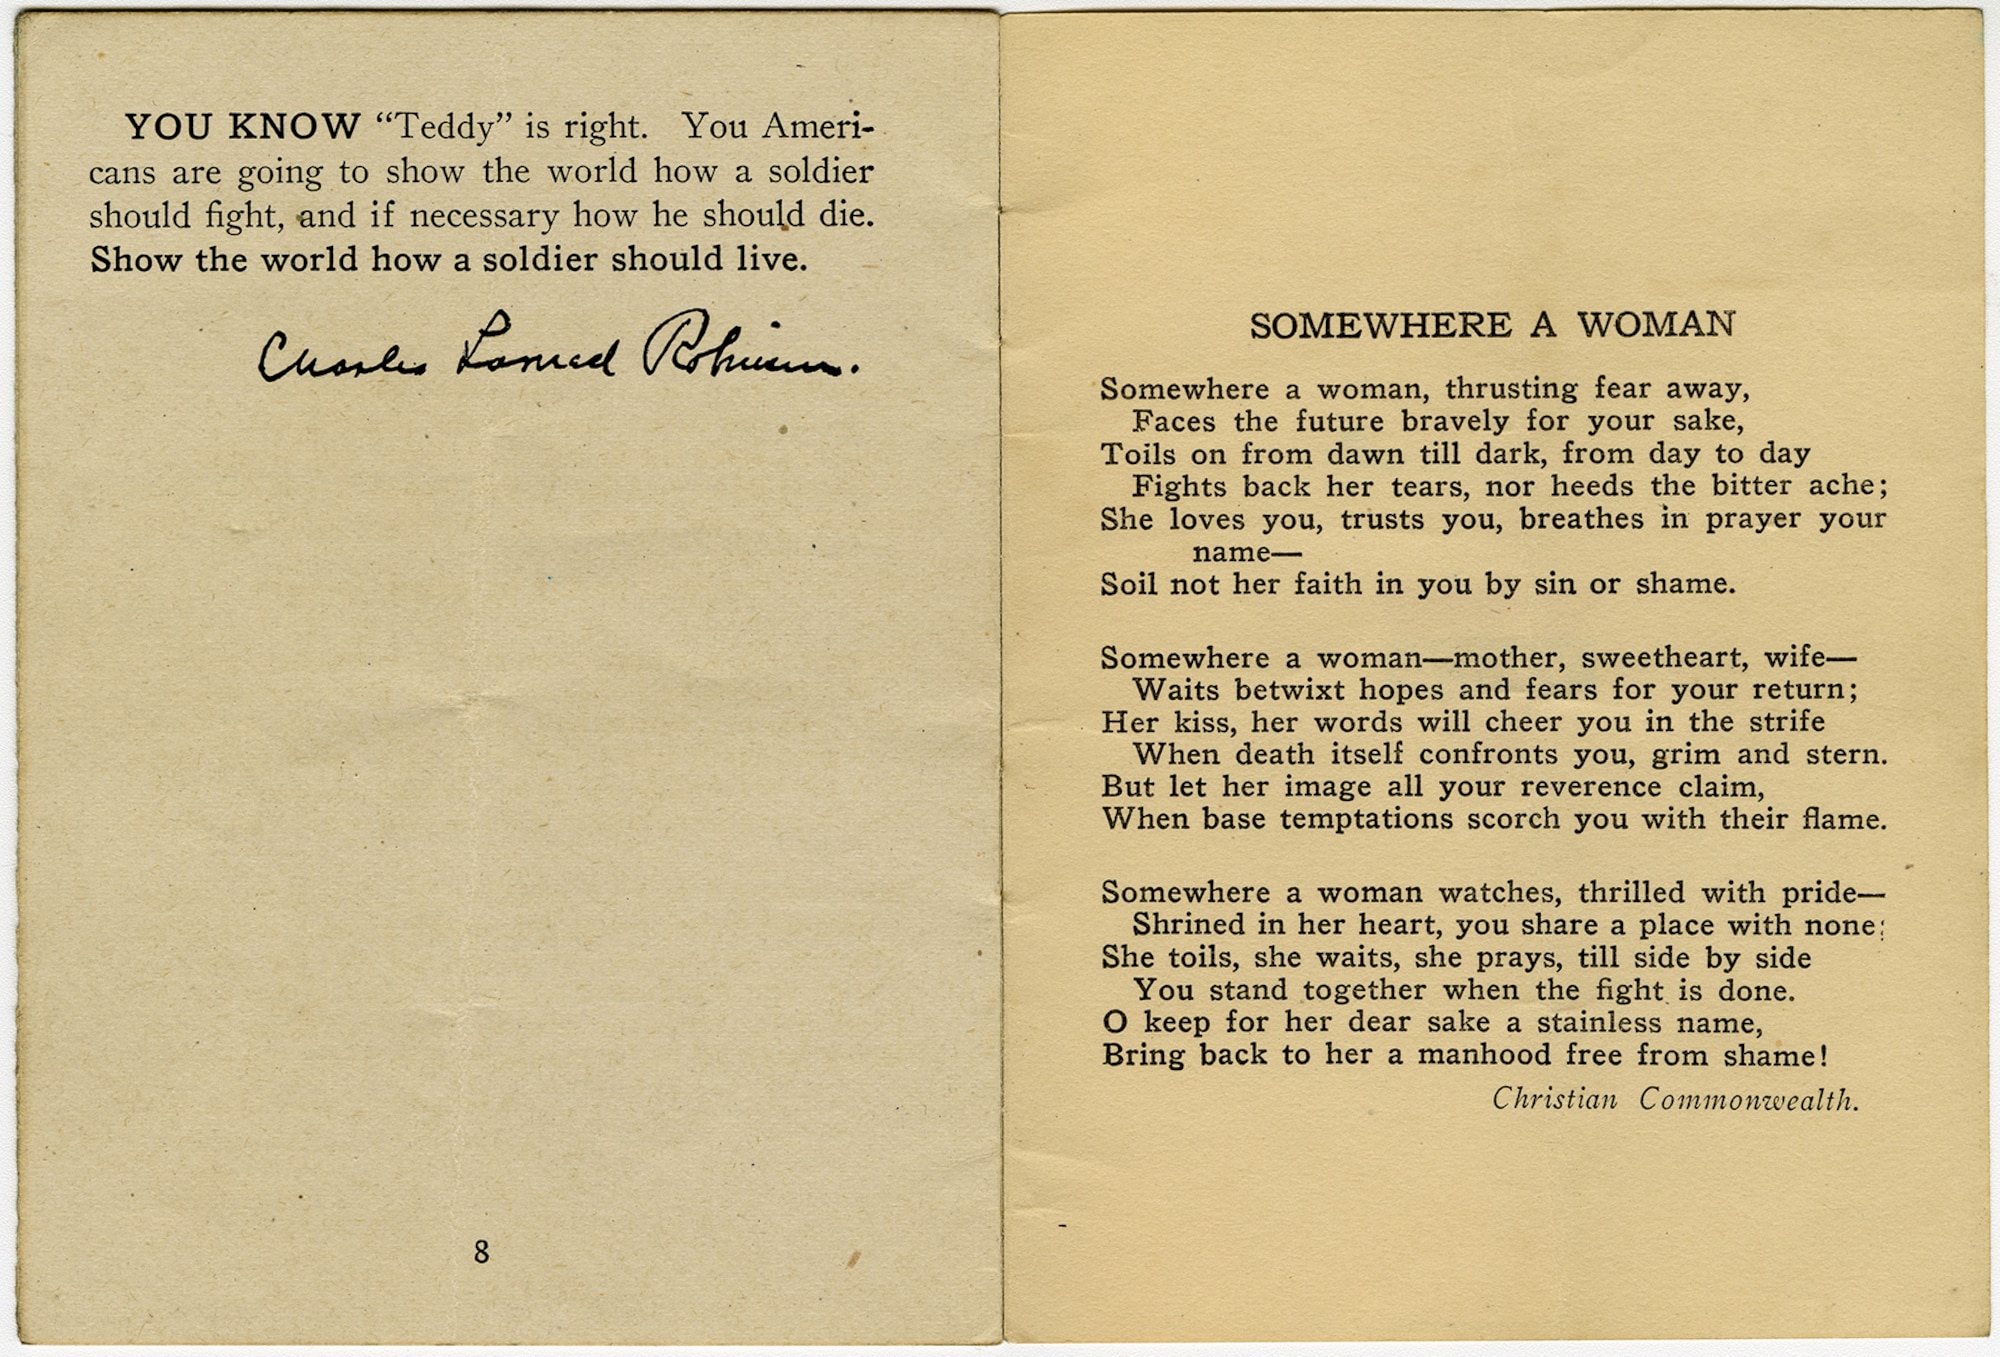 This educational pamphlet was written by Charles L. Robinson and published in 1918 by the YMCA and American Defense Society. It cautions American soldiers of the health risks posed by venereal disease and encourages the troops to be true to their wives and sweethearts back home. The pamphlet was widely distributed to American soldiers serving in France during World War I. (U.S. Air Force photo)